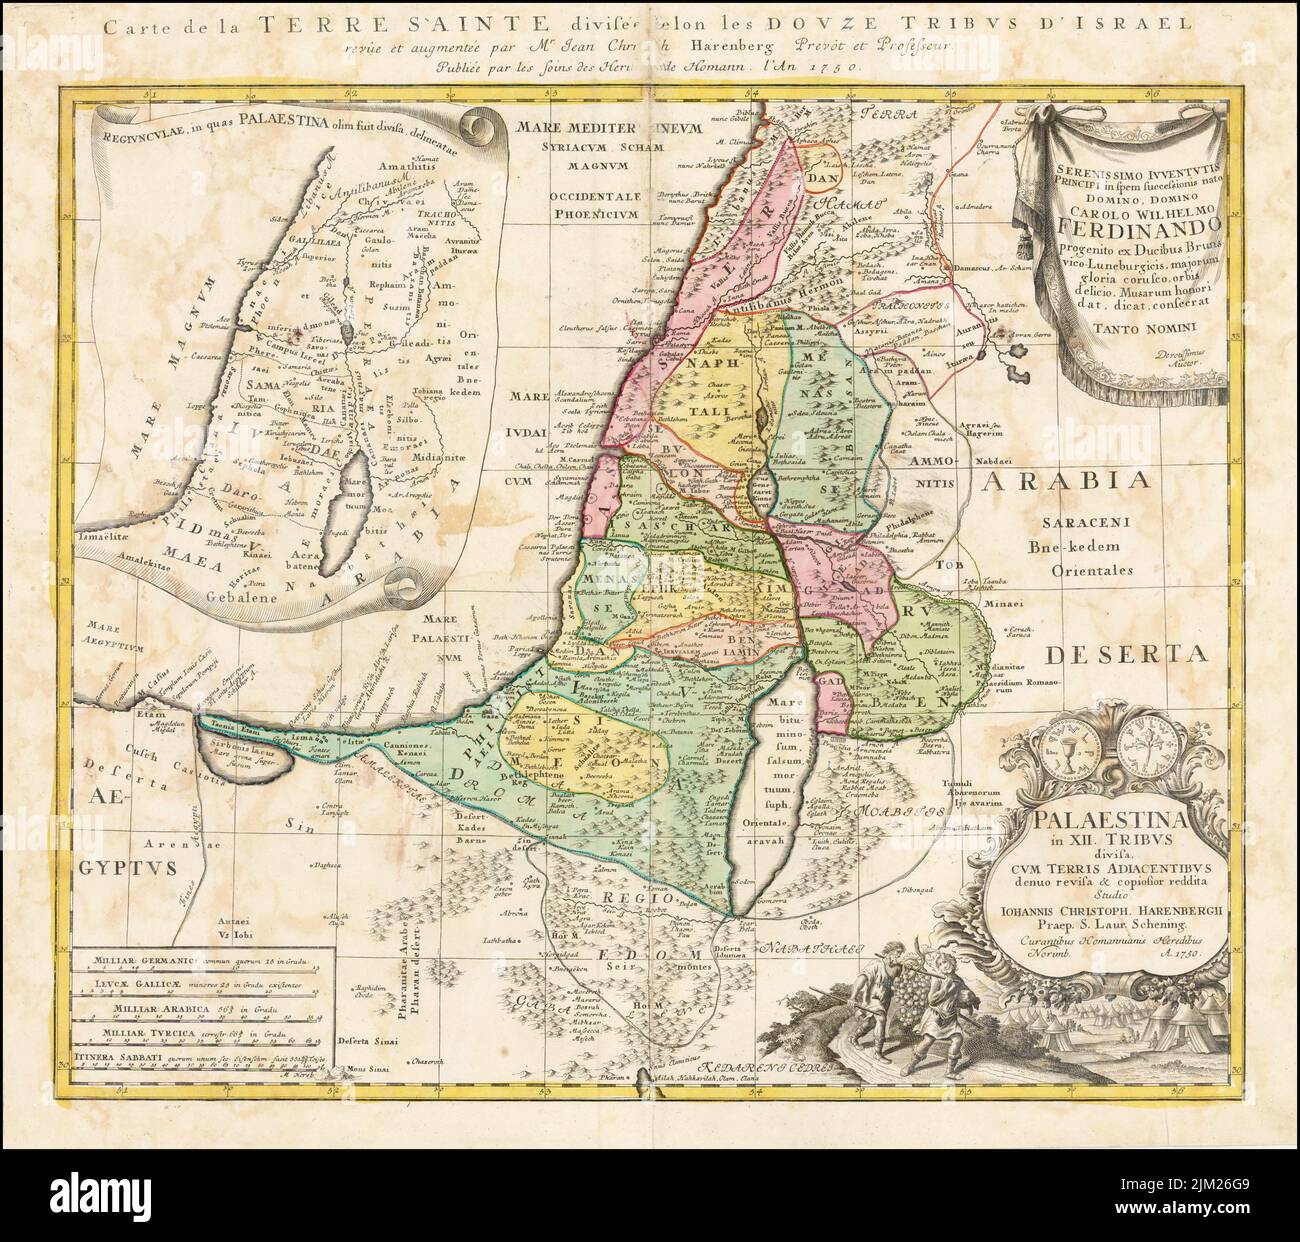 Map of the Holy Land Divided into the Twelve Tribes of Israel. Museum: PRIVATE COLLECTION. Author: JOHANN BAPTIST HOMANN. Stock Photo